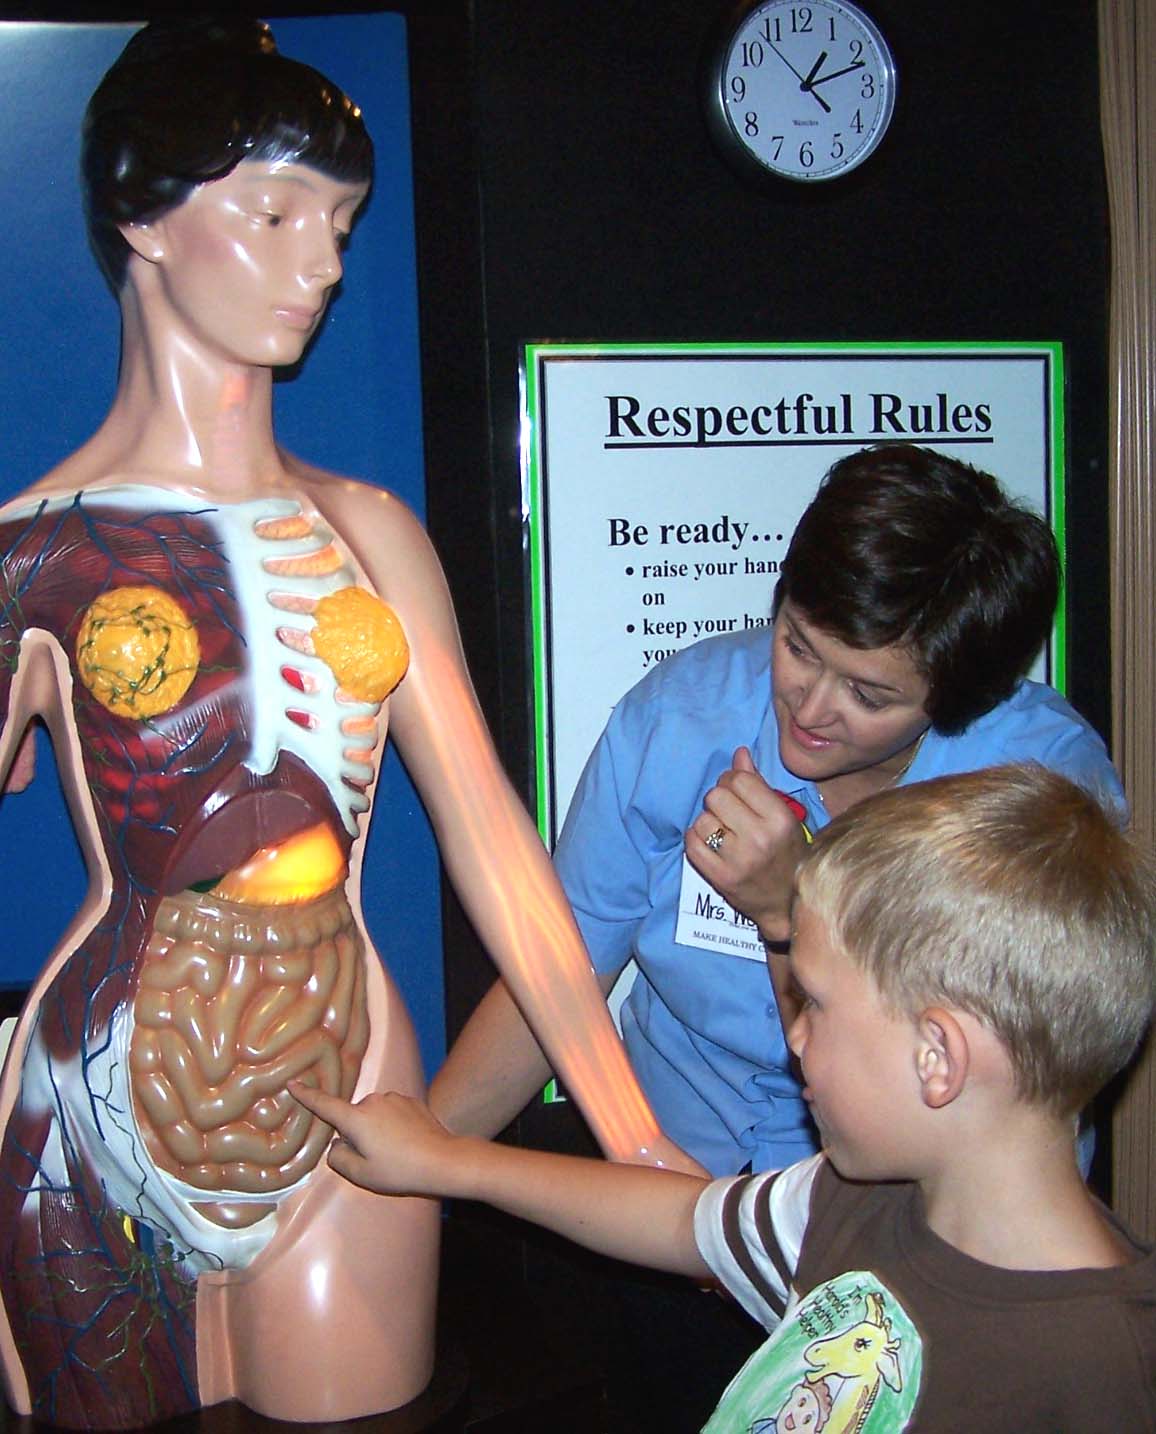 Child and instructor looking at TAM (Transparent Anatomical Mannequin)